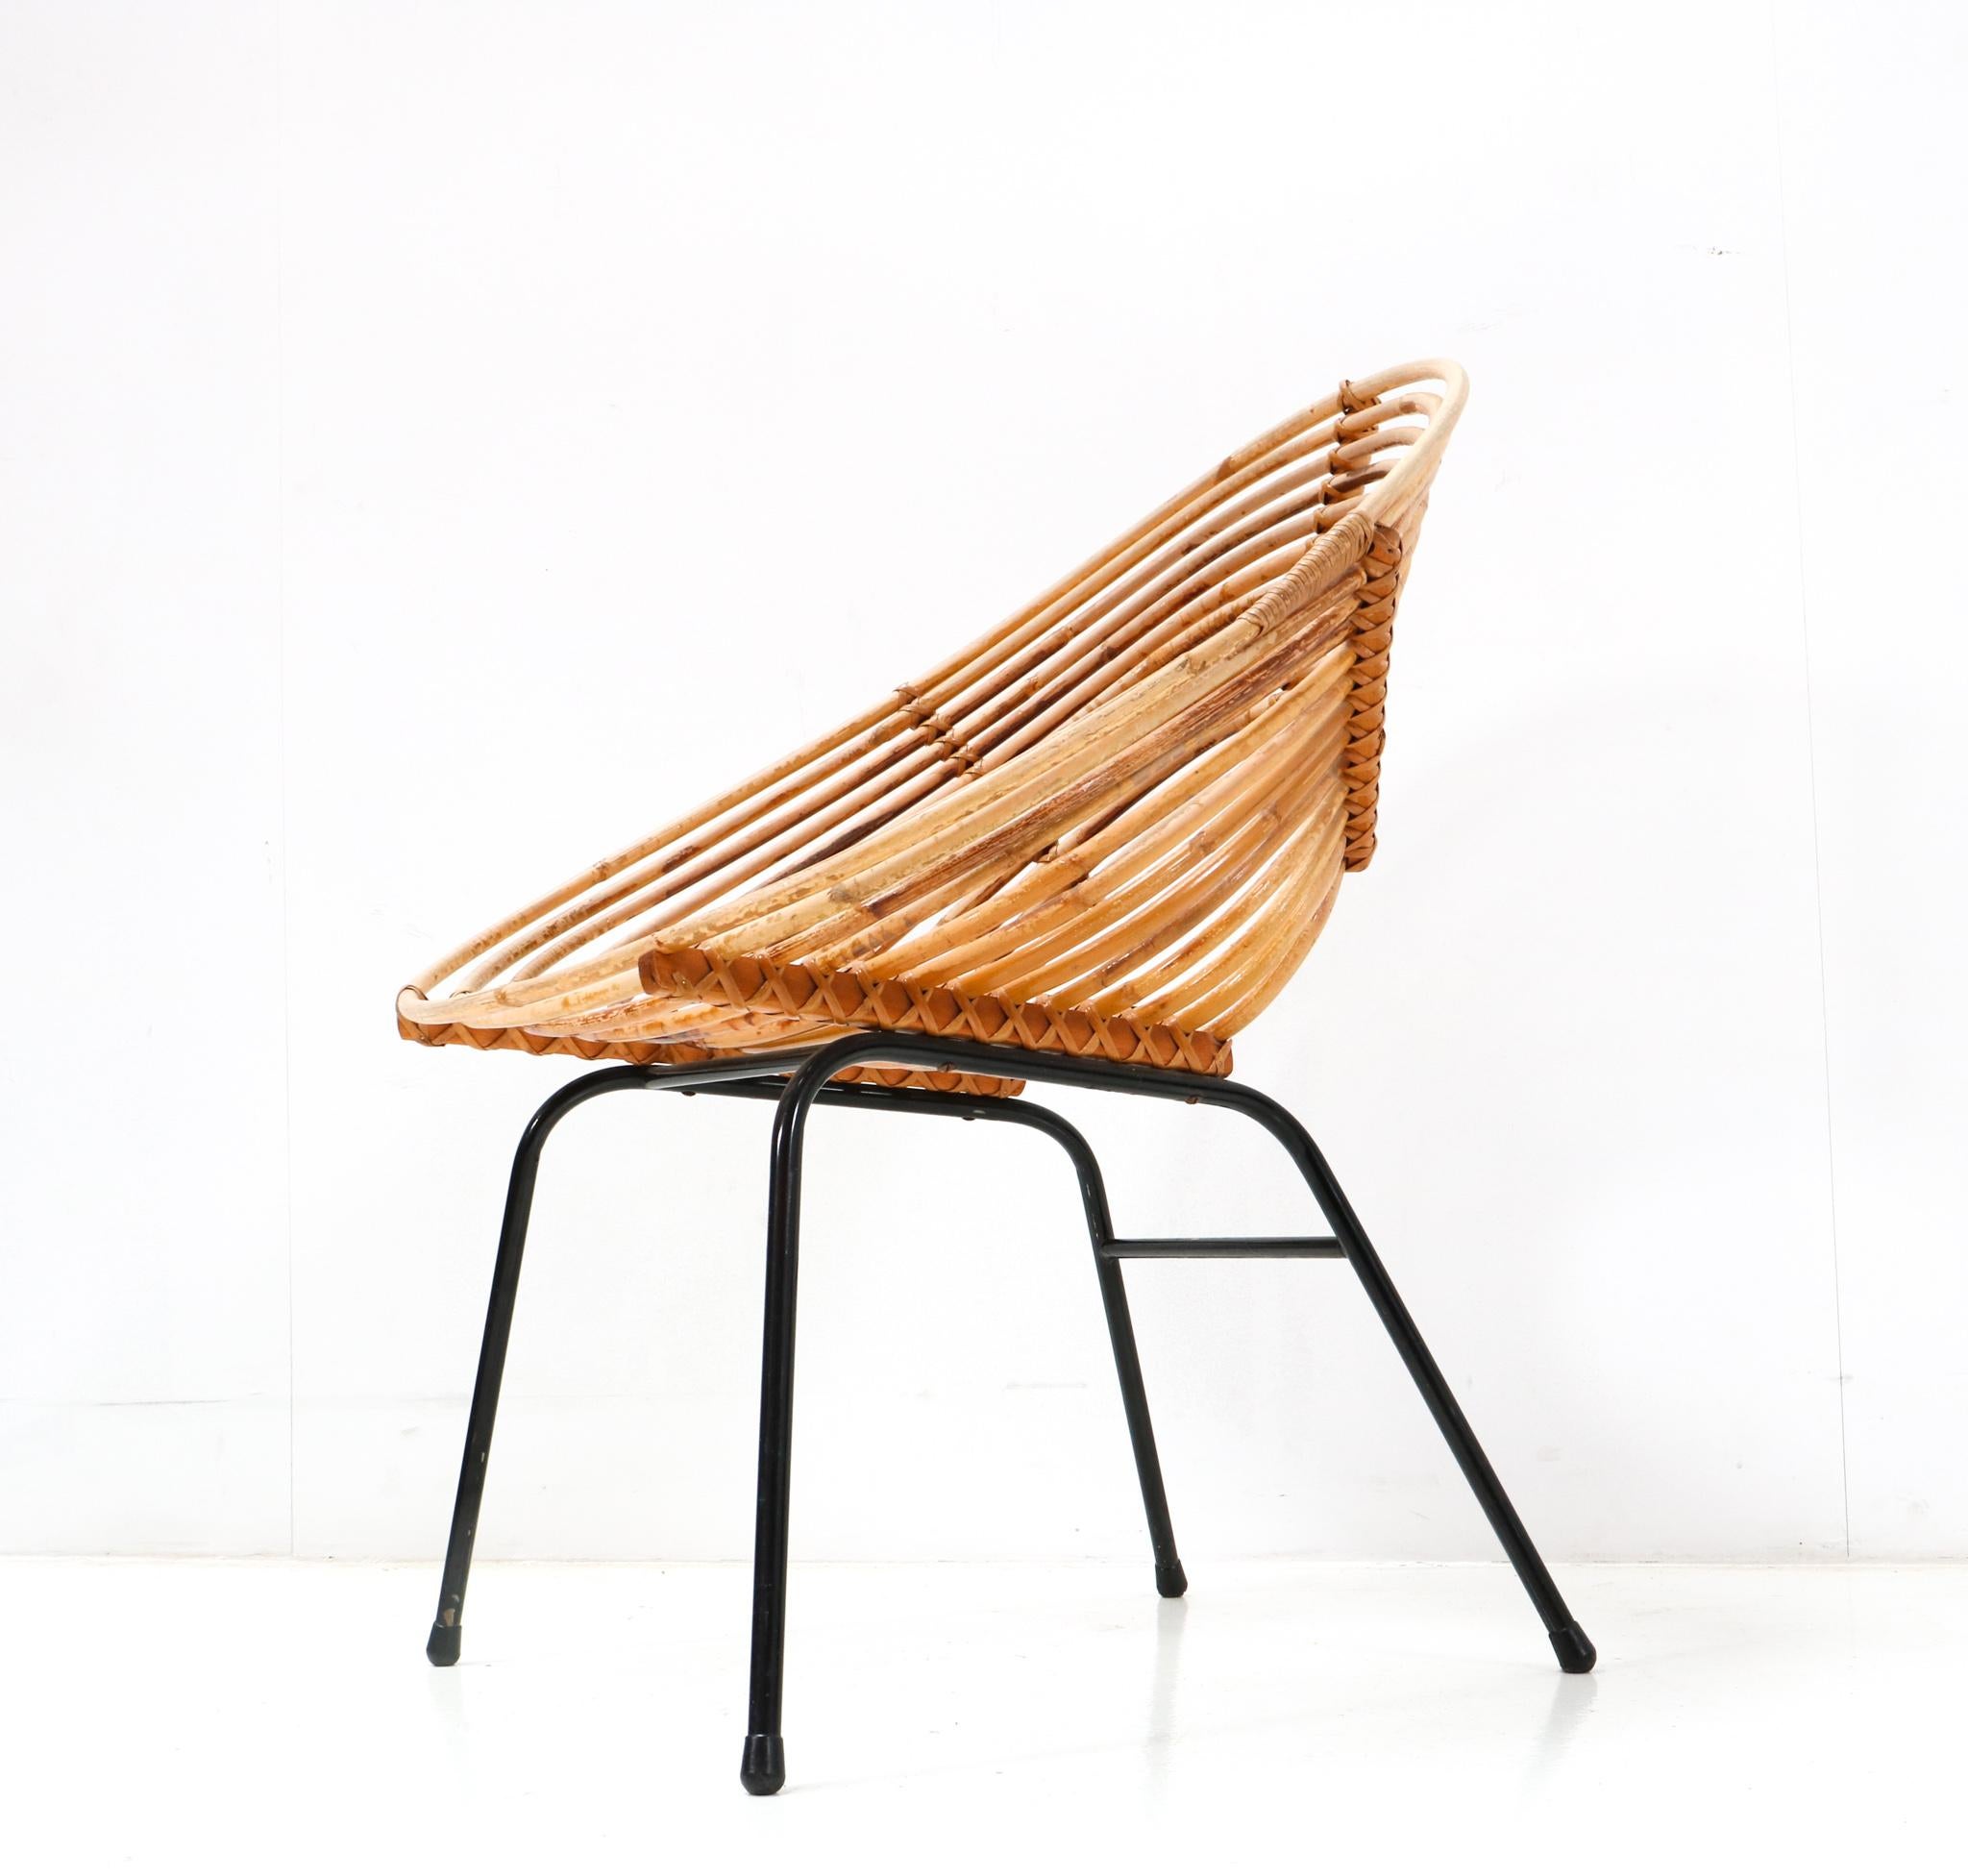 Rattan Mid-Century Modern Lounge Chair by Dirk van Sliedregt for Rohe, 1950s In Good Condition For Sale In Amsterdam, NL